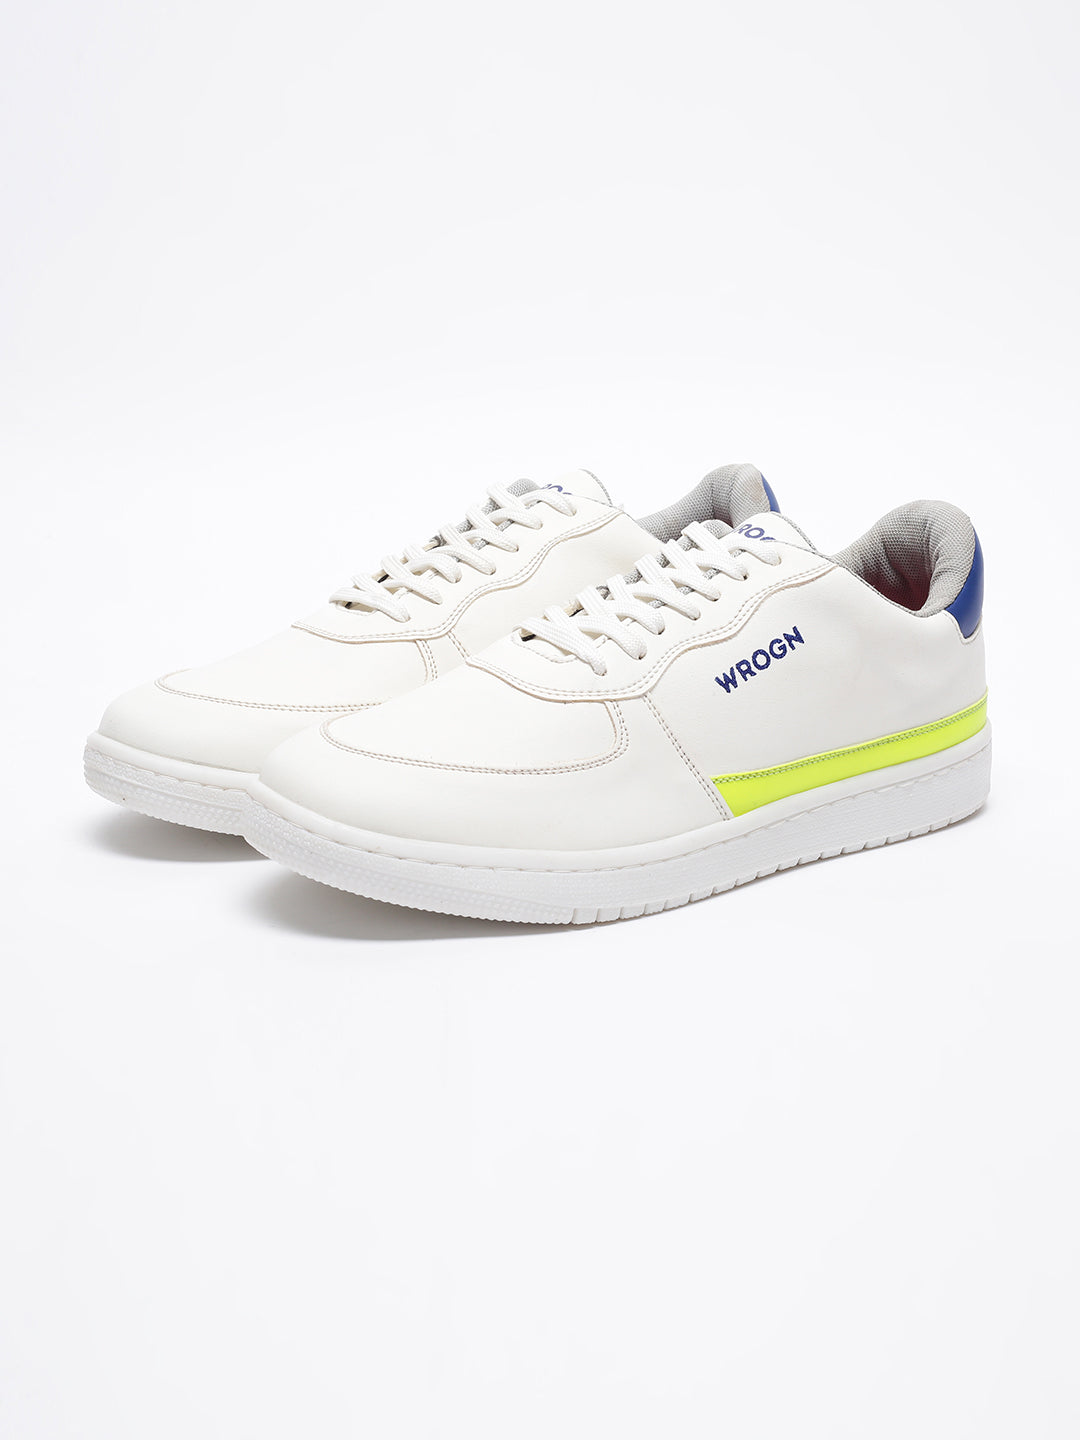 Wrogn Tint White Sneakers